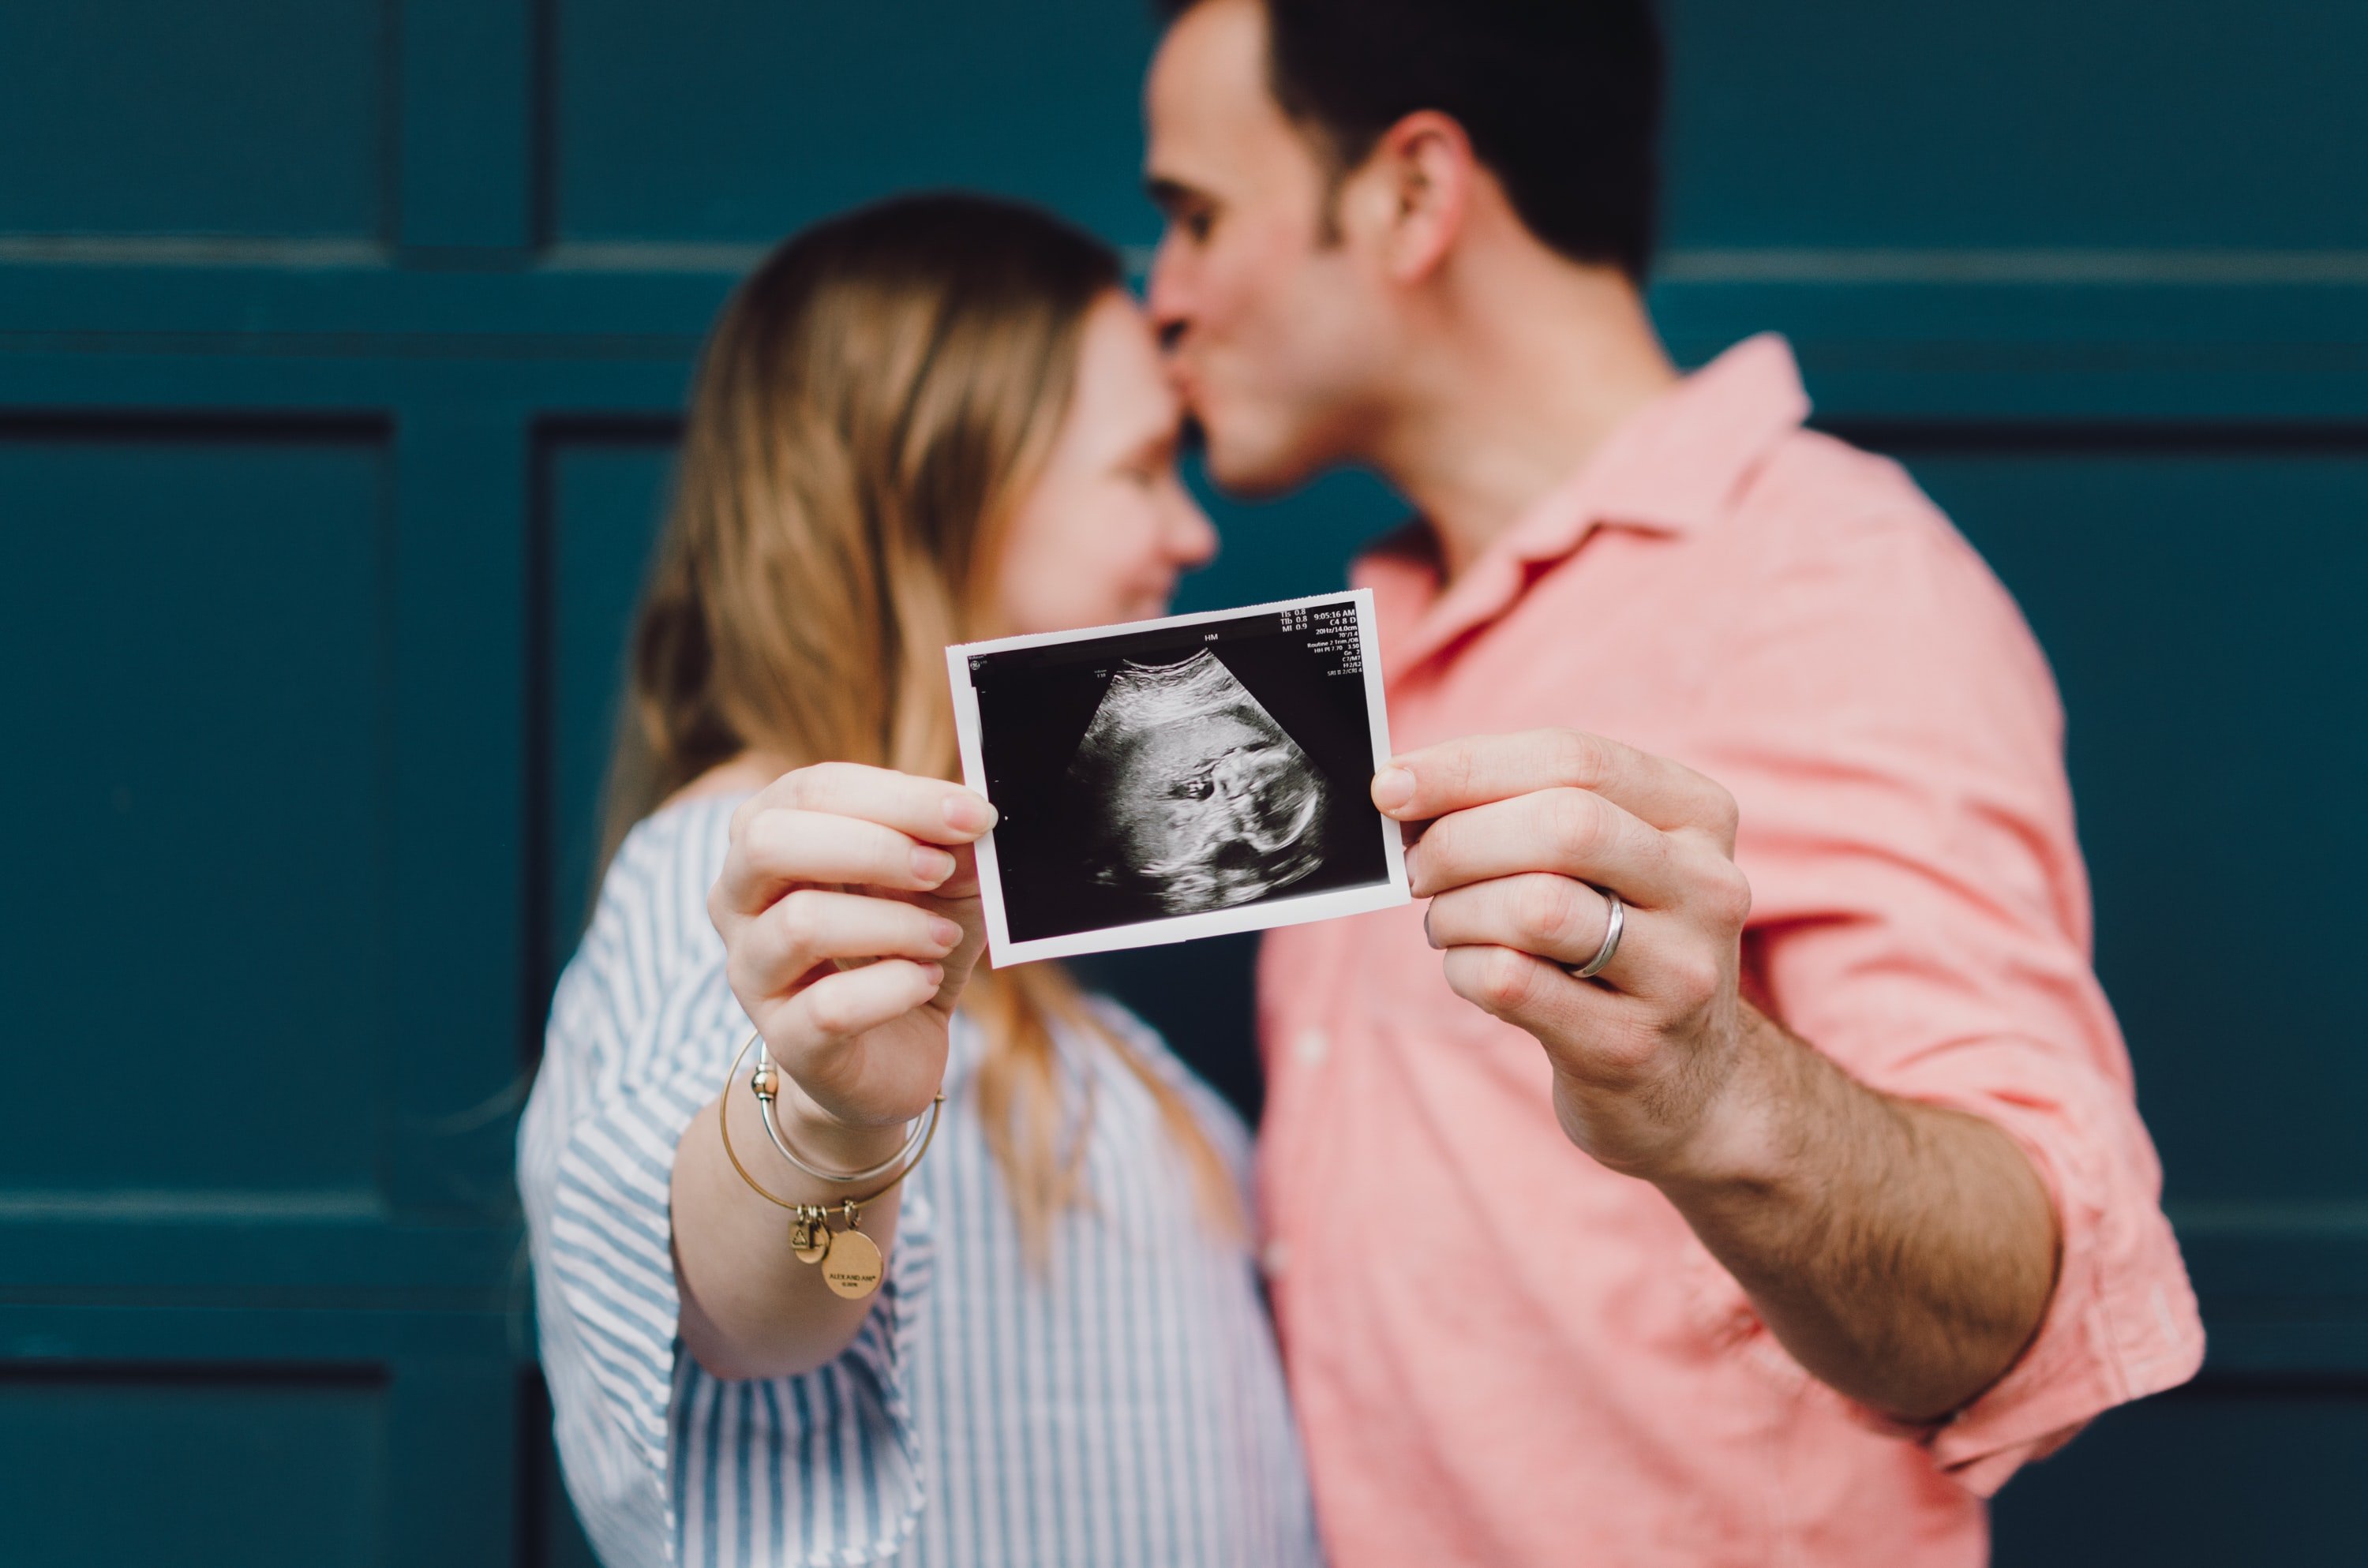 The paternity test results came back positive & OP realized he was the baby's father | Photo: Unsplash  